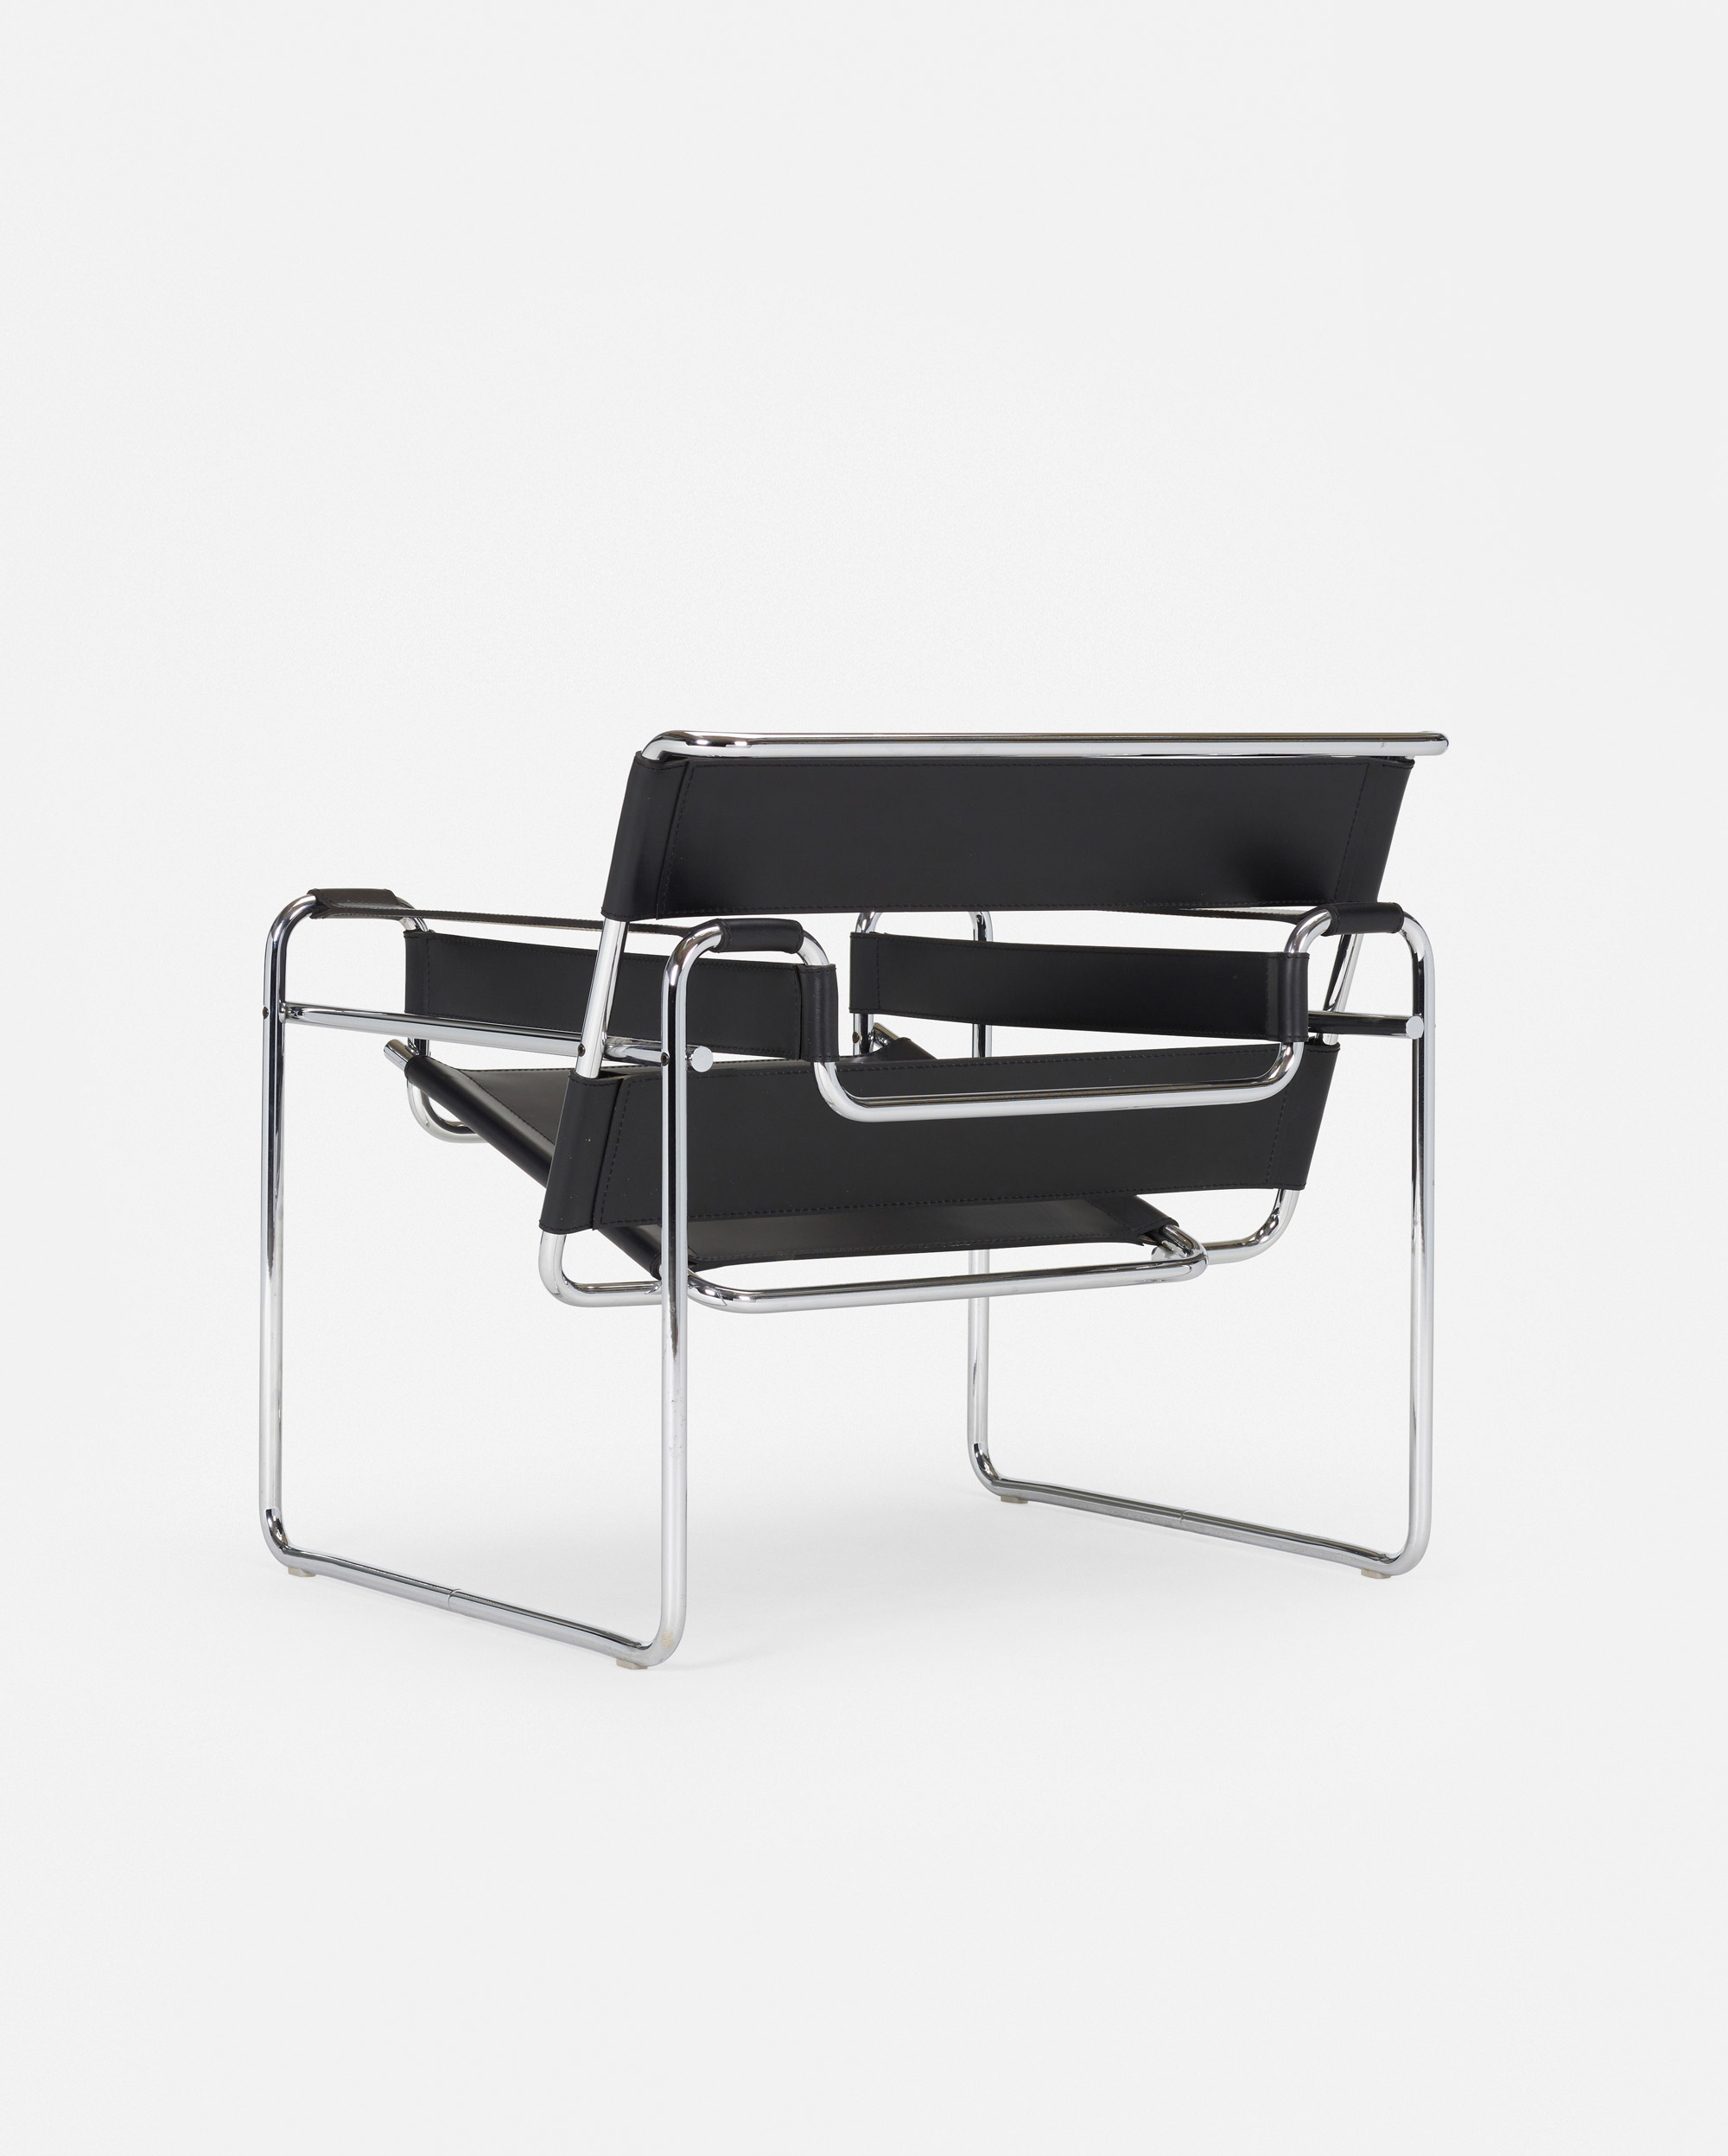 Marcel Breuer, Wassily chair, KnollStudio, Hungary, 1925 / c. 1990, chrome-plated steel, leather, 74 × 79 × 69 cm © Image Copyright by Wright Auction